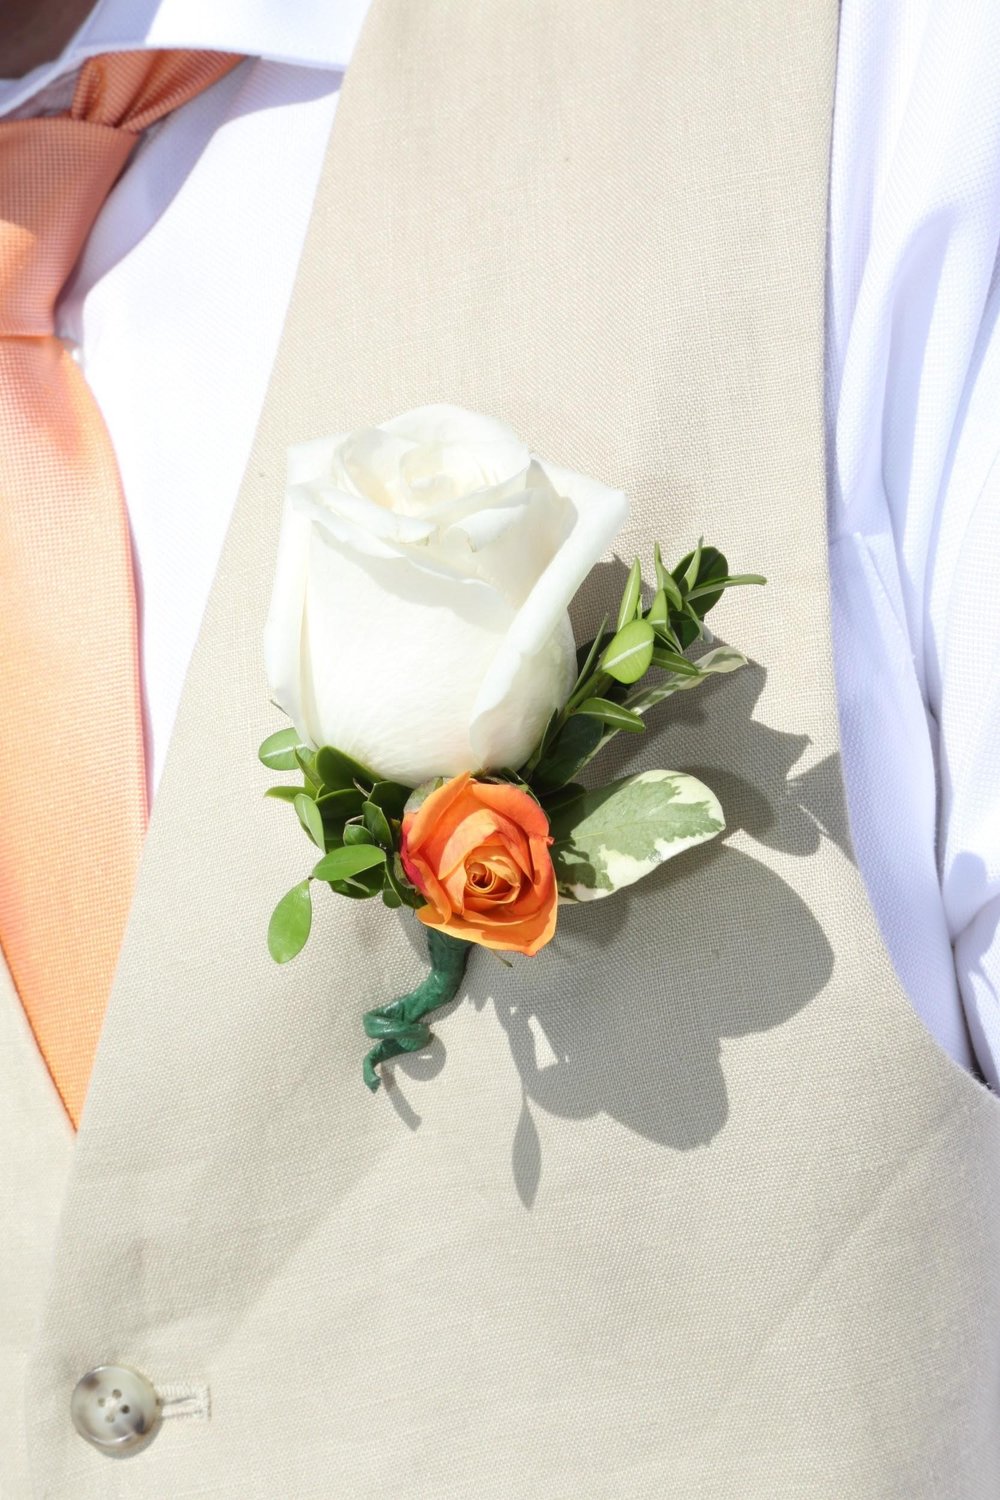 The groom had a touch of peach to match the bridal bouquet